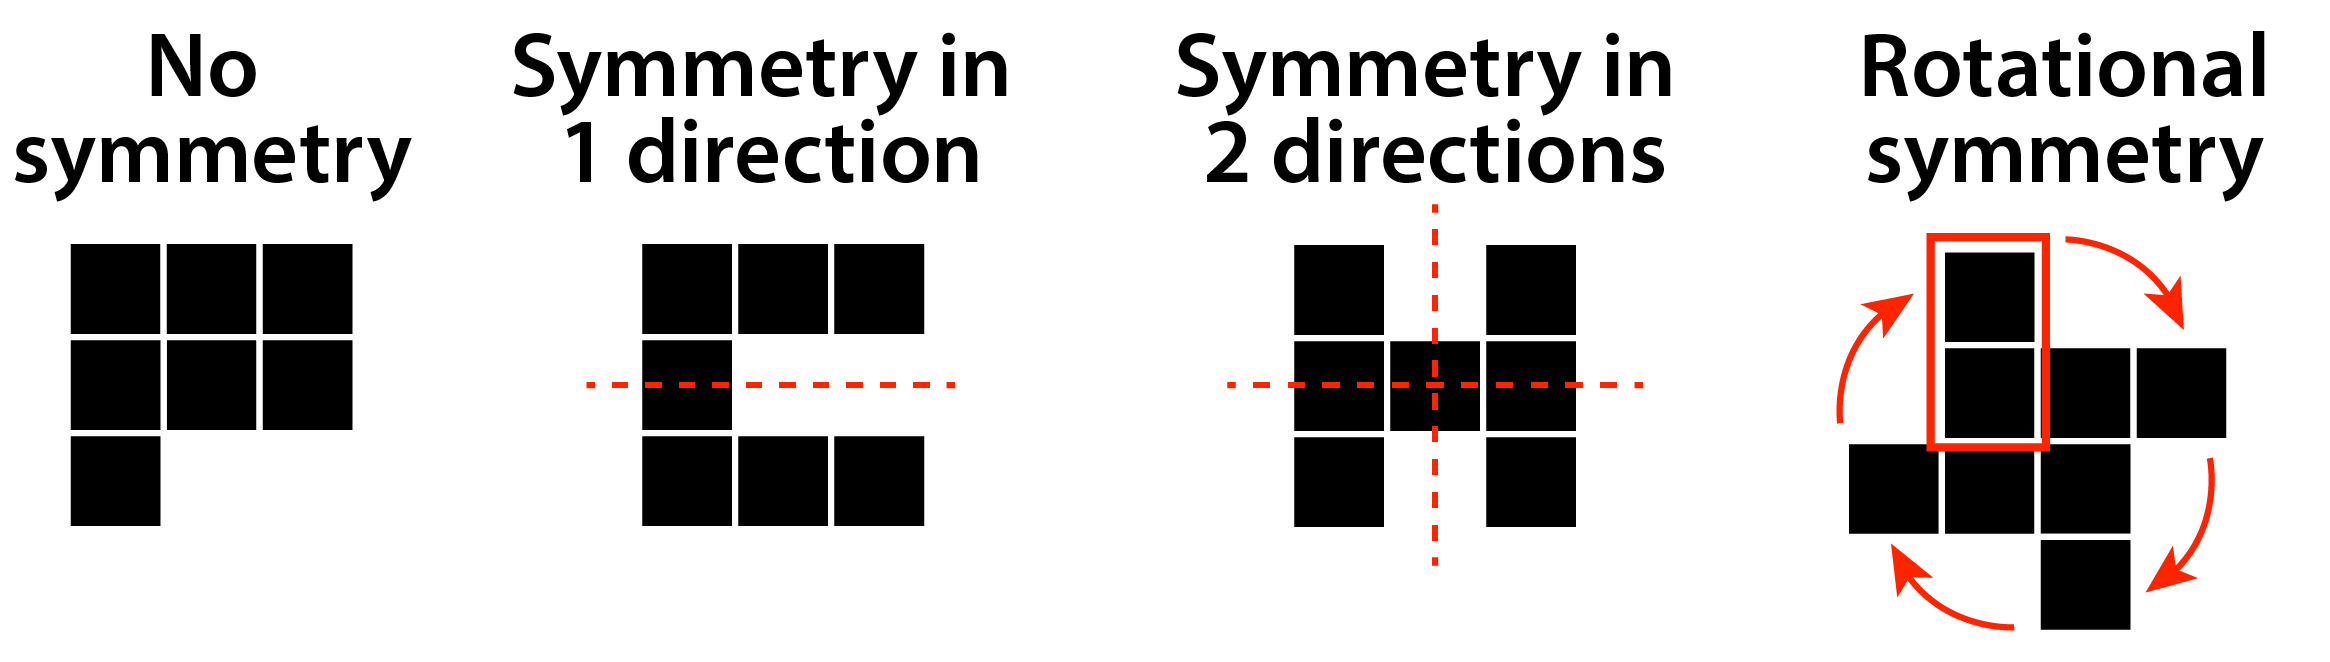 Examples of symmetry types